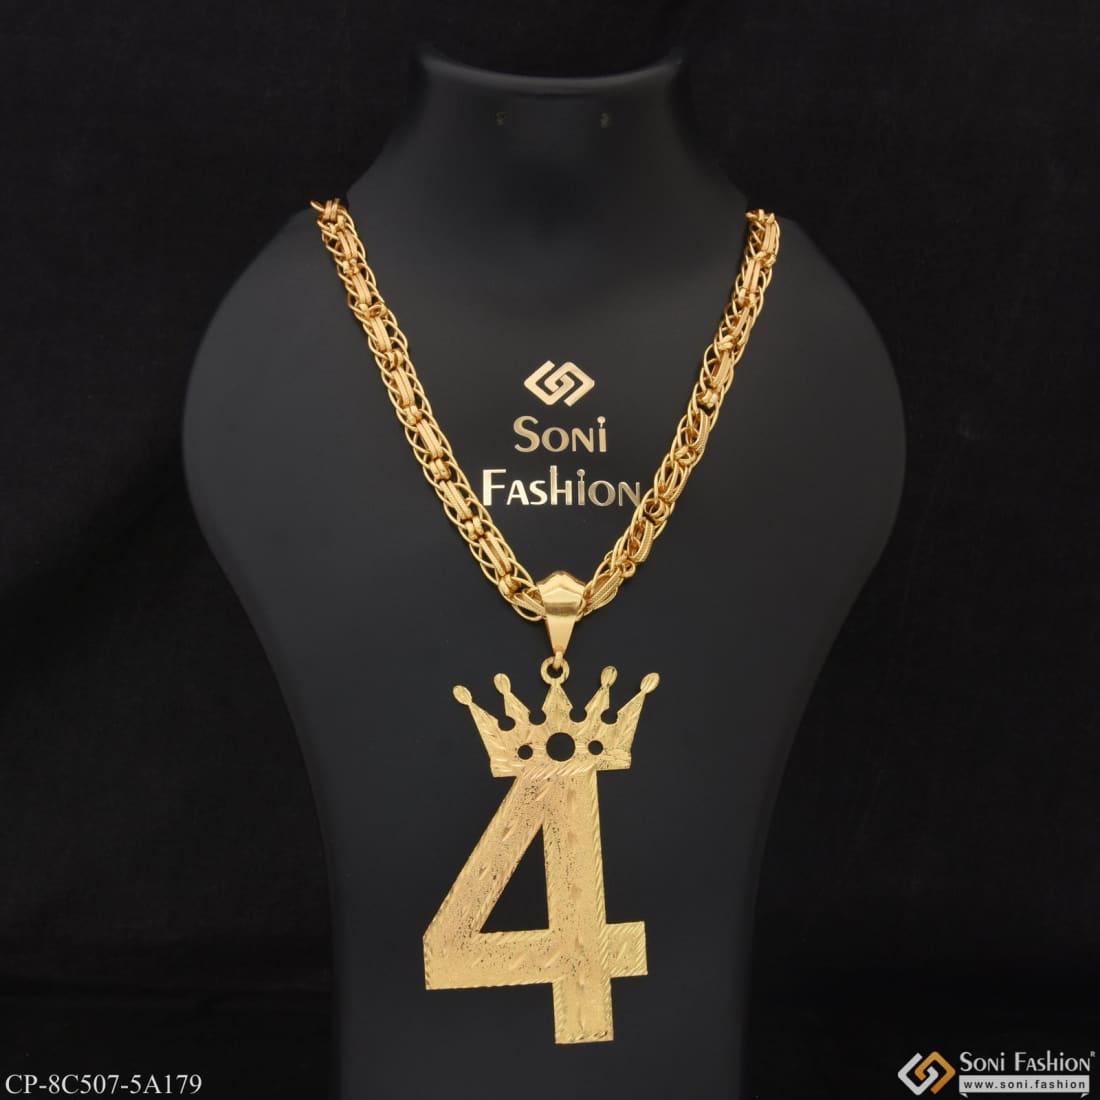 4 Number Glamorous Design Gold Plated Chain Pendant Combo For Men  (CP-C506-A178) at Rs 850.00 | Gold Plated Pendant | ID: 2852709820512